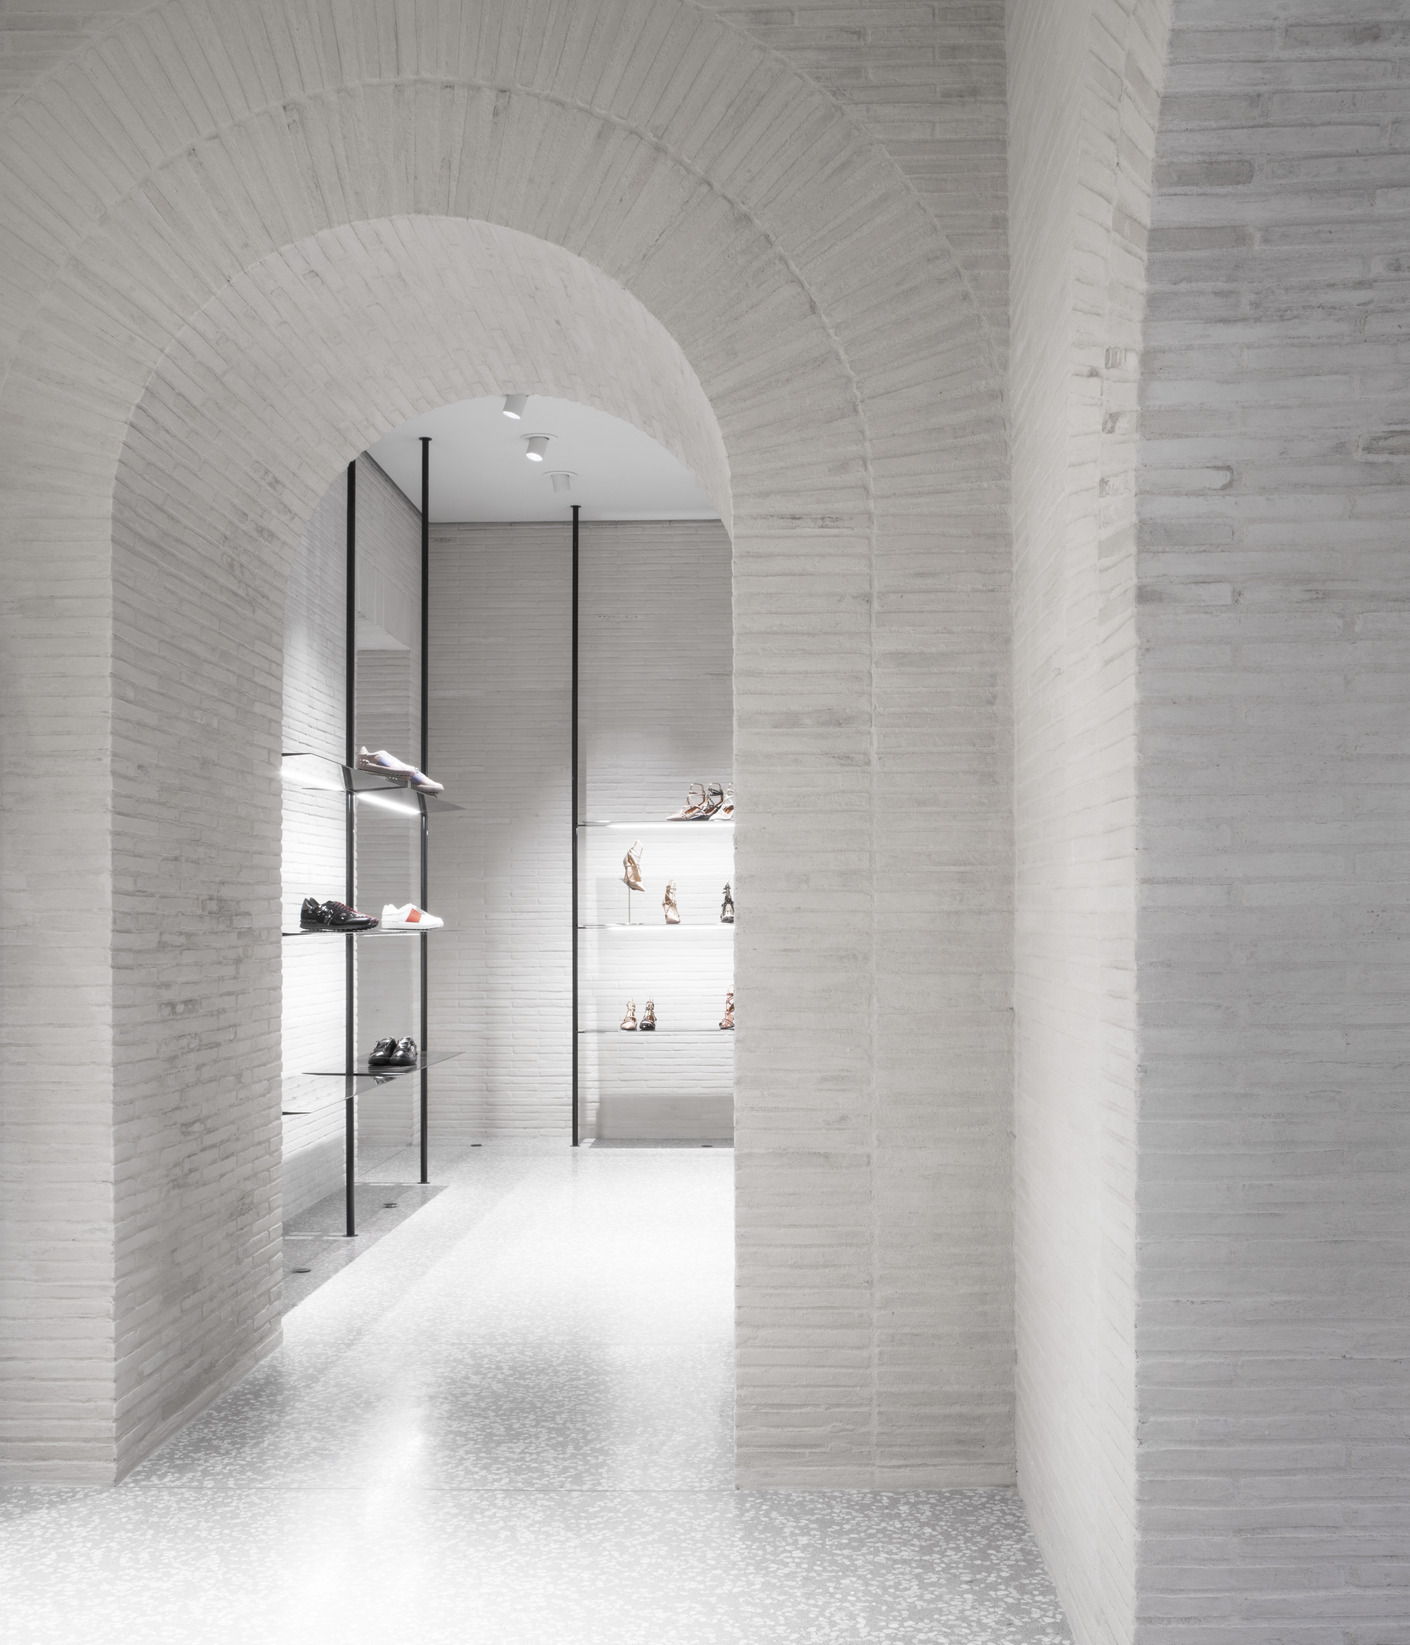 Valentino Flagship Store in Rome develops between Piazza di Spagna and Piazza Mignanelli. The first floor contains light, non-structural arches in polished white plaster to enhance the products.